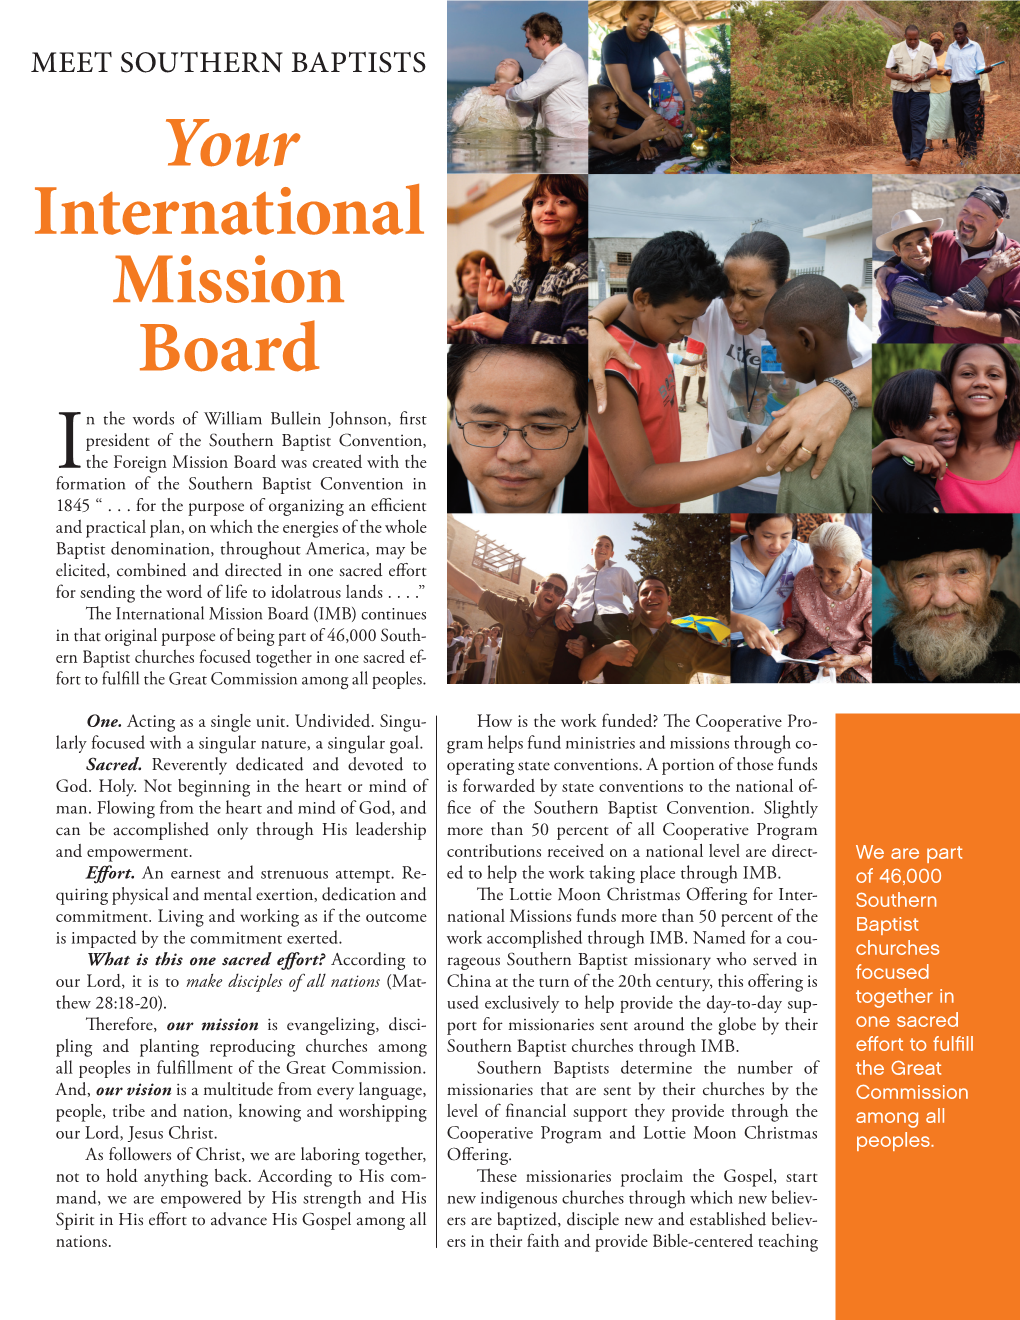 Your International Mission Board